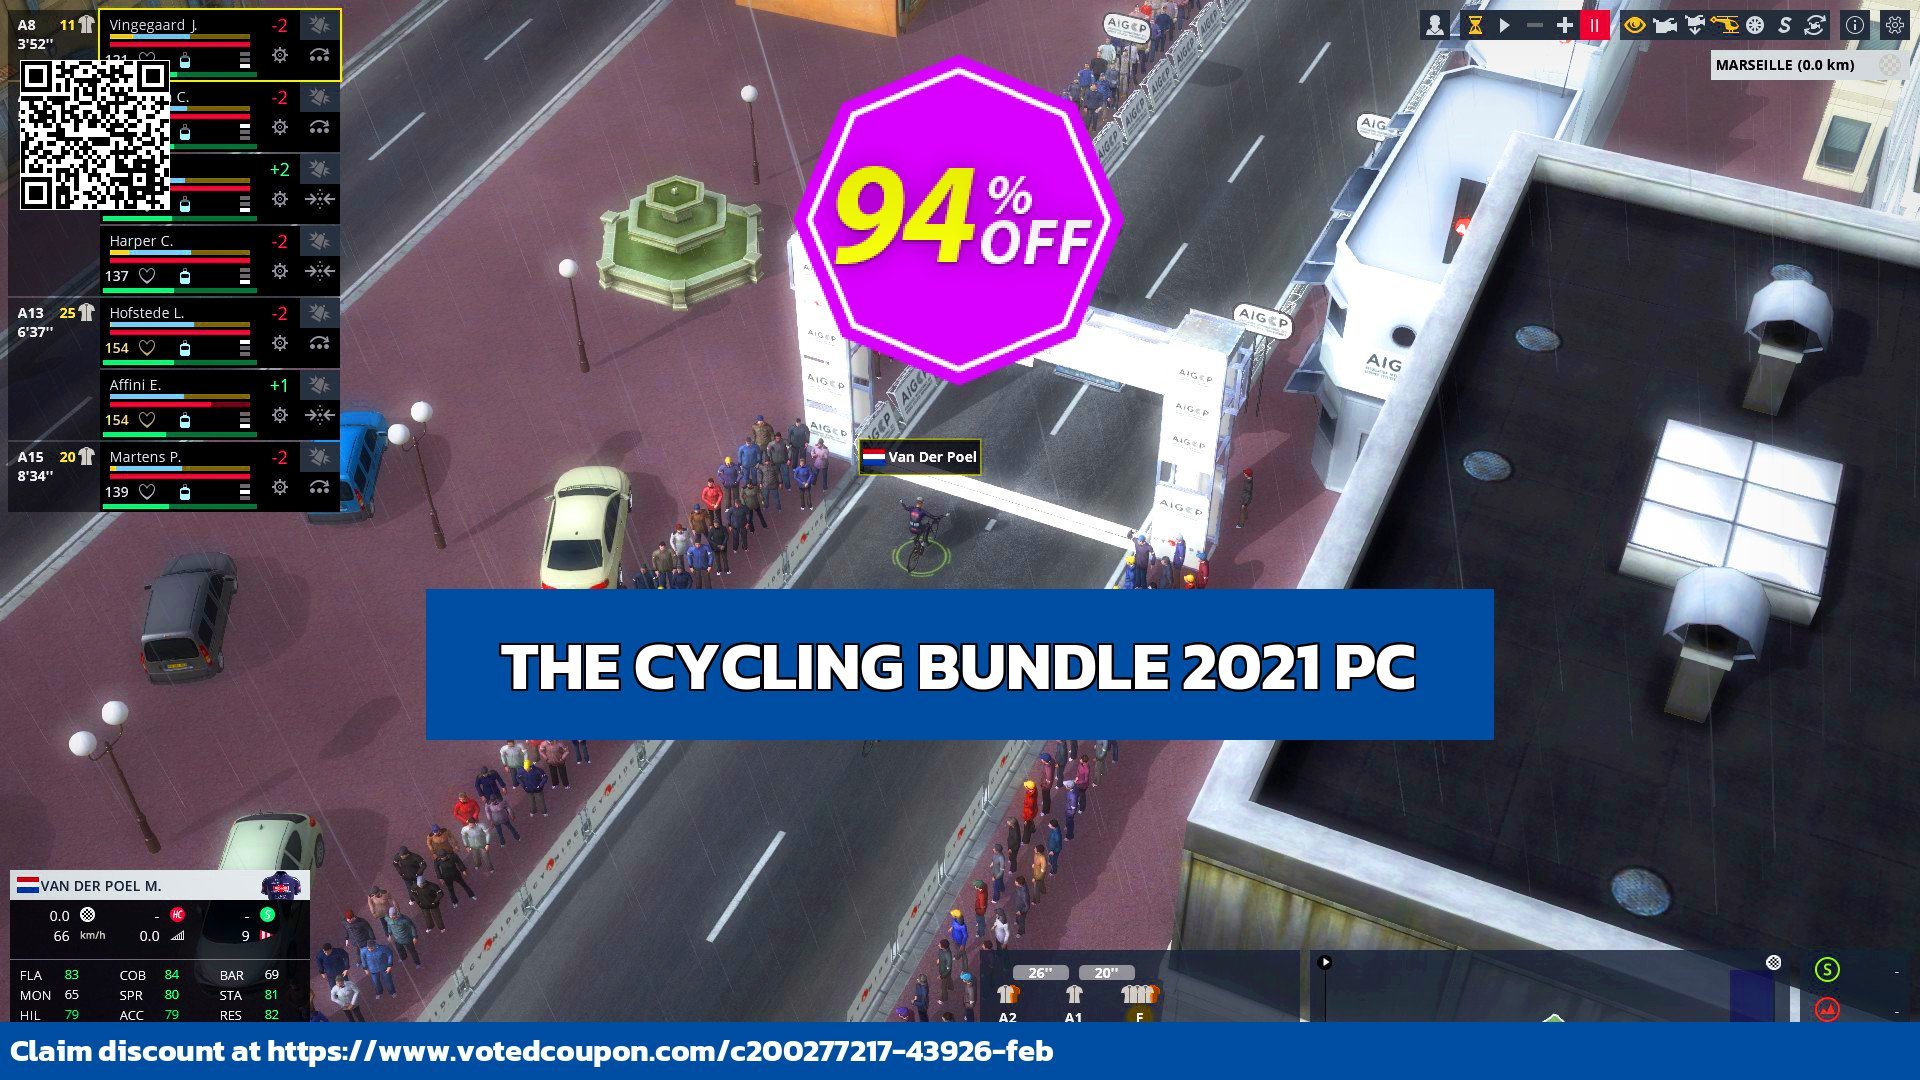 THE CYCLING BUNDLE 2021 PC Coupon Code May 2024, 94% OFF - VotedCoupon